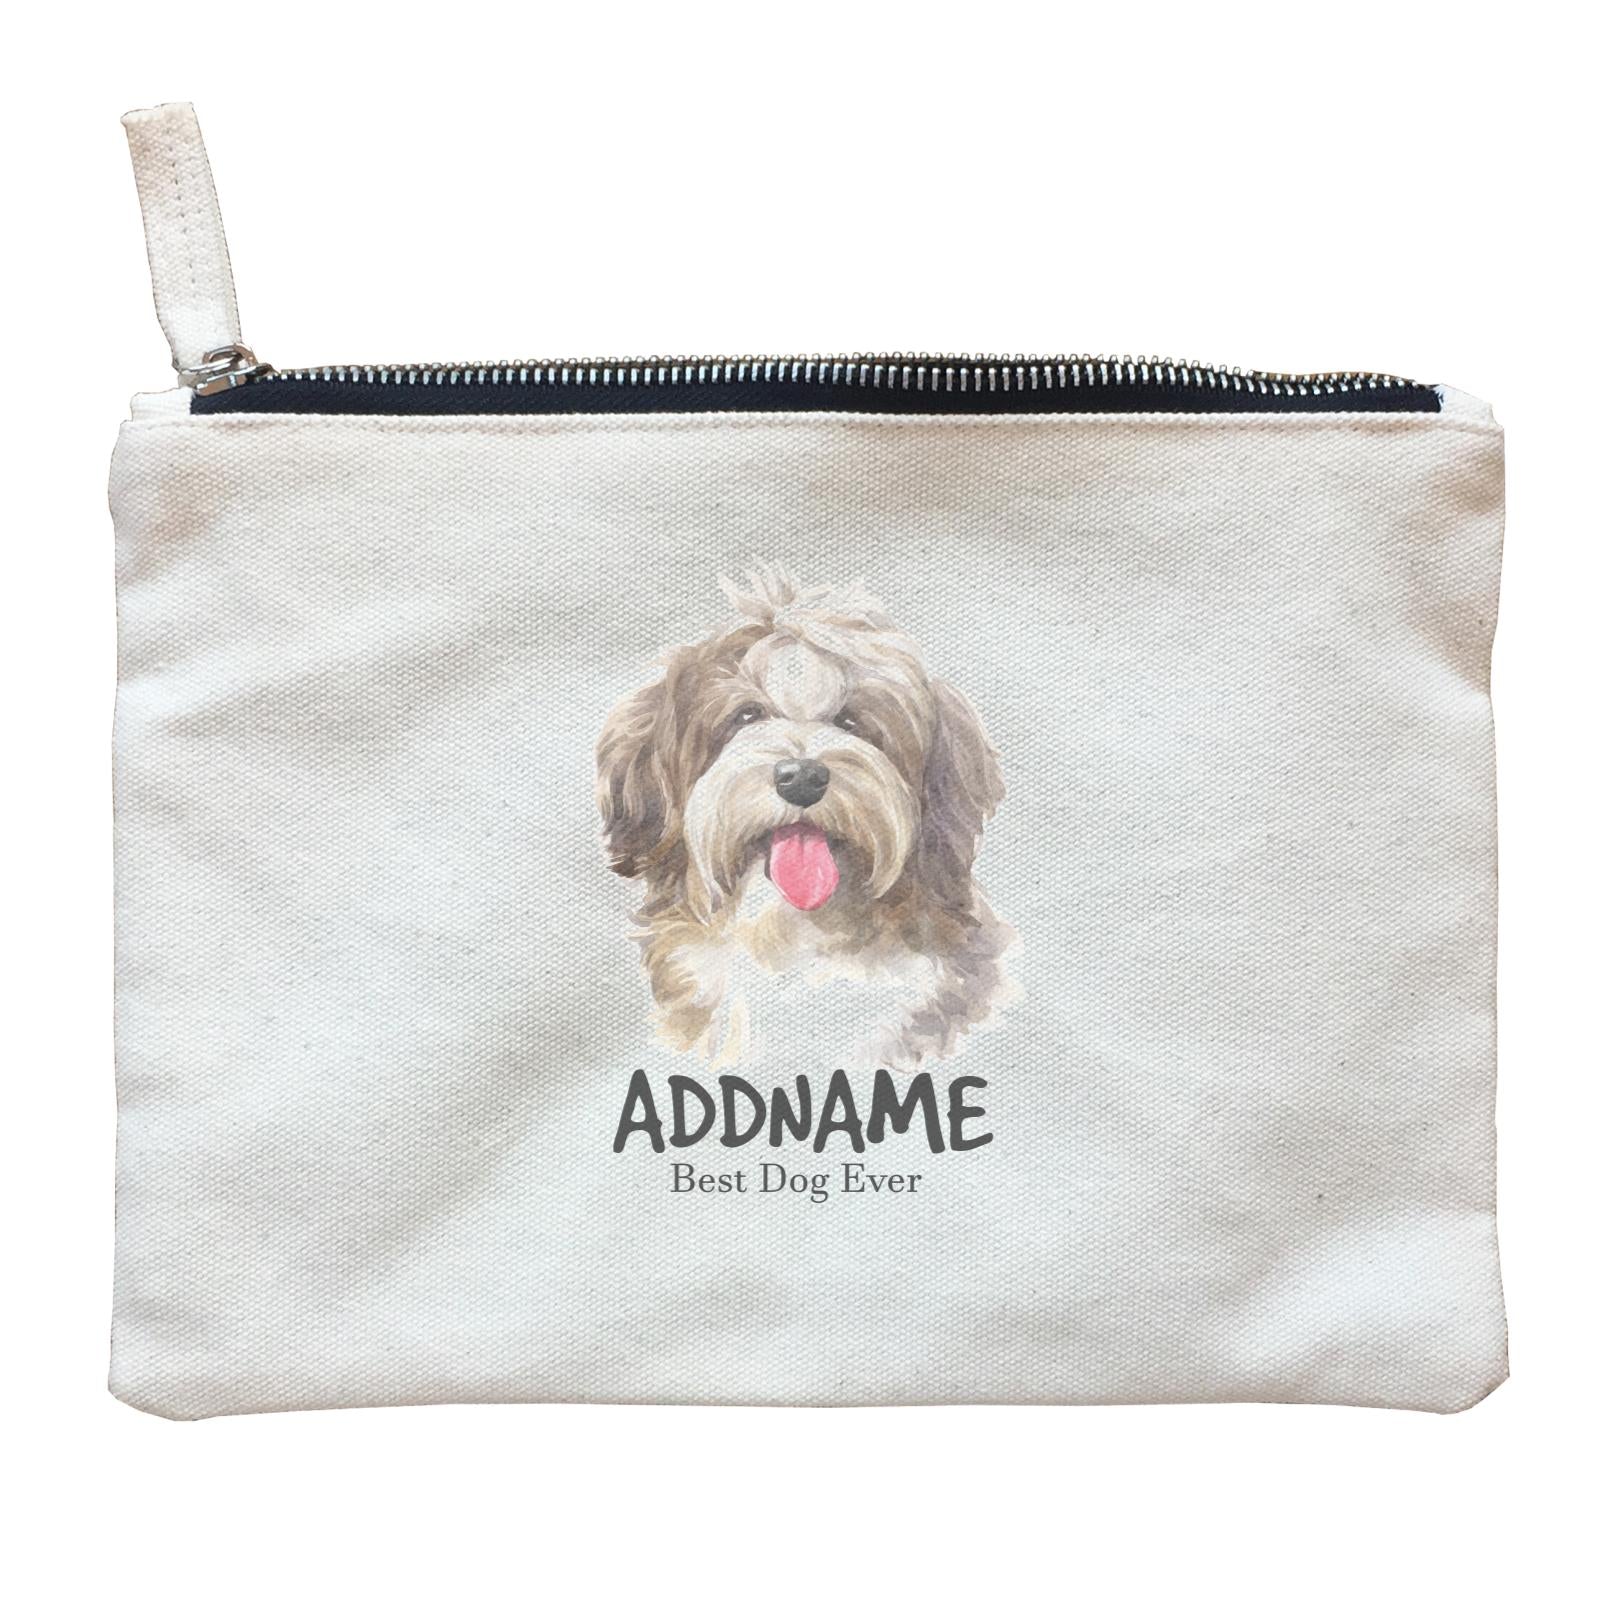 Watercolor Dog Shaggy Havanese Best Dog Ever Addname Zipper Pouch